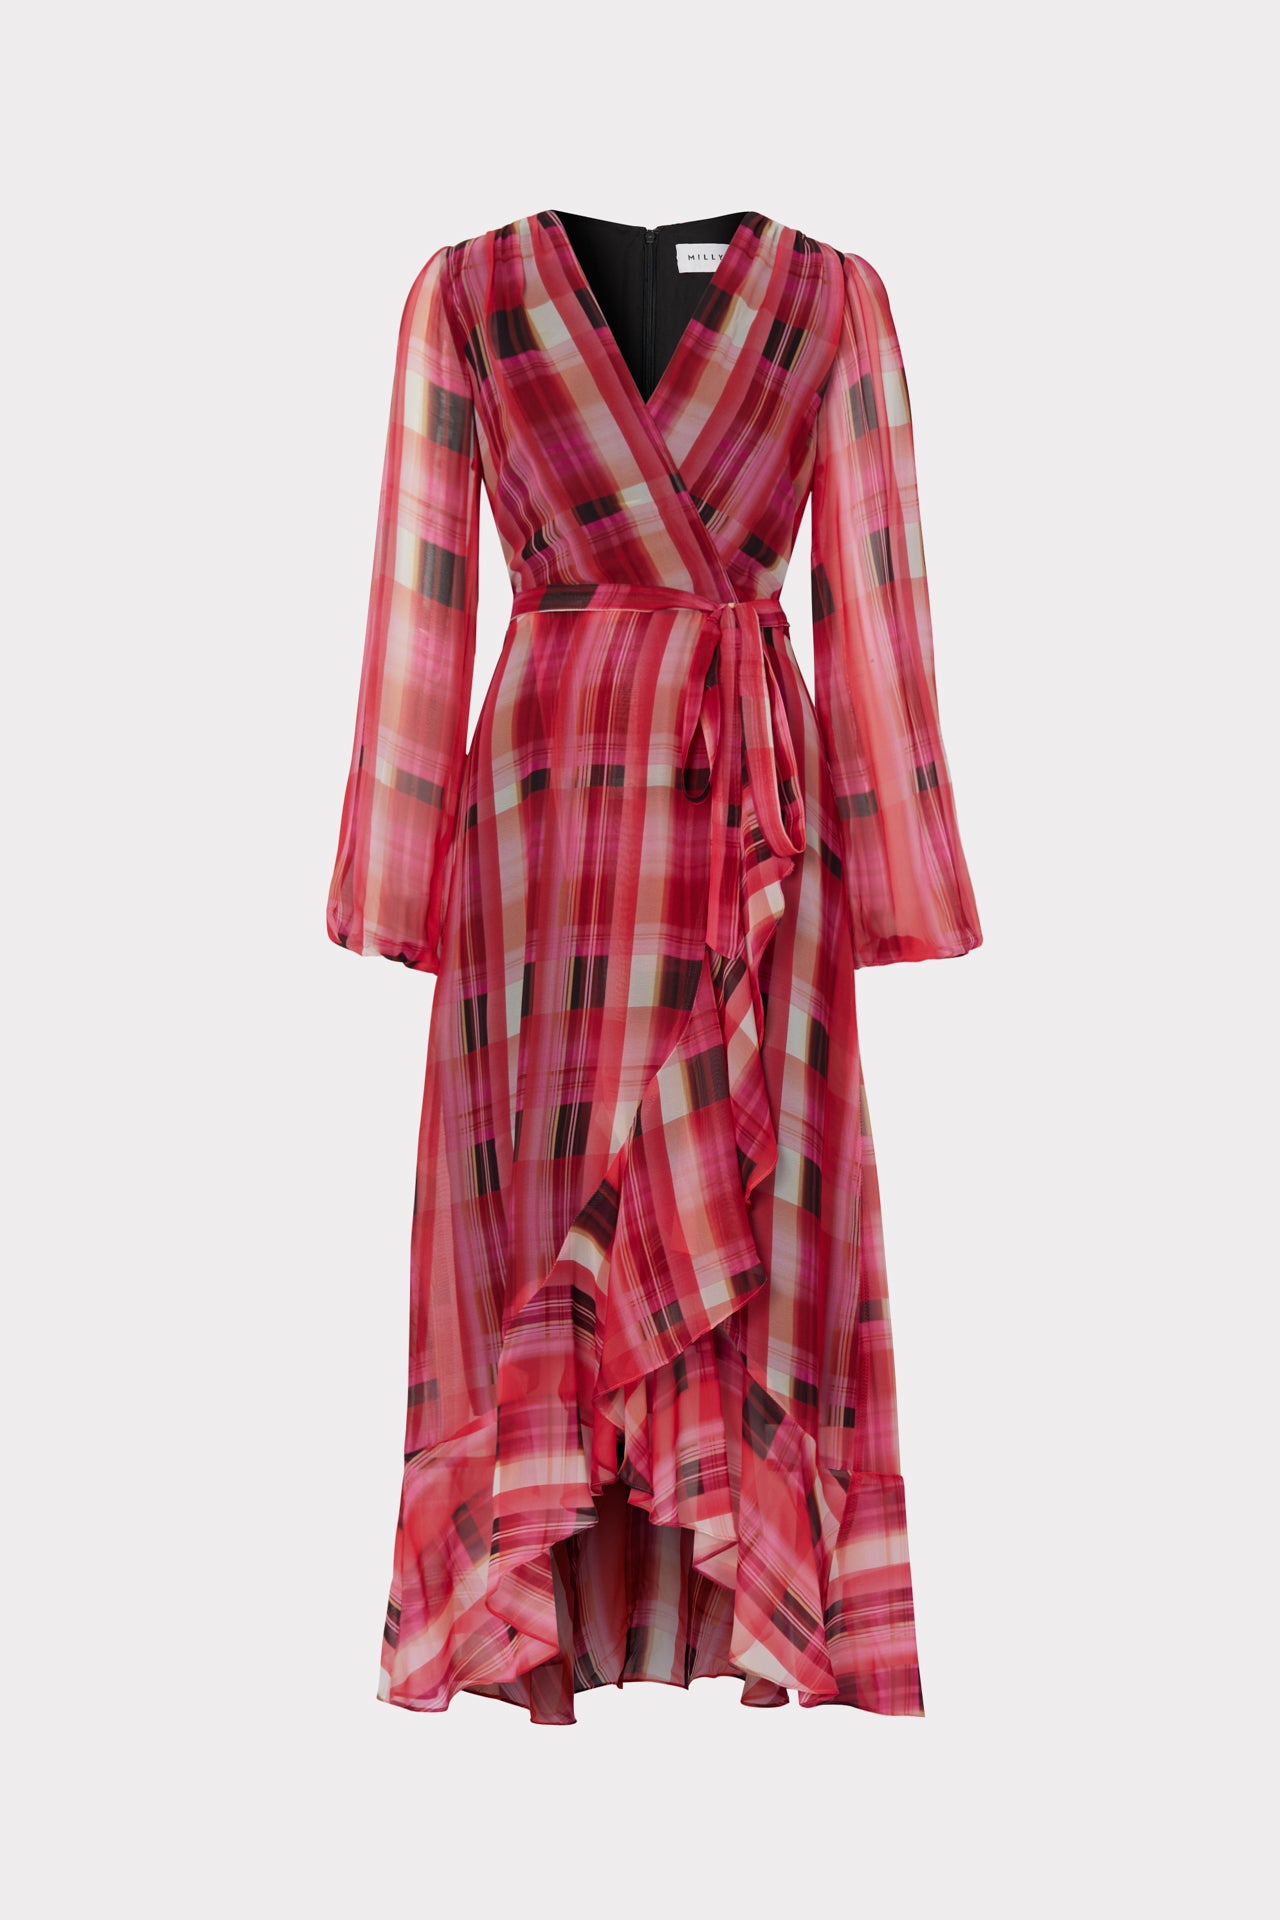 Halley Prep Plaid Sheer Midi Dress in Red | MILLY